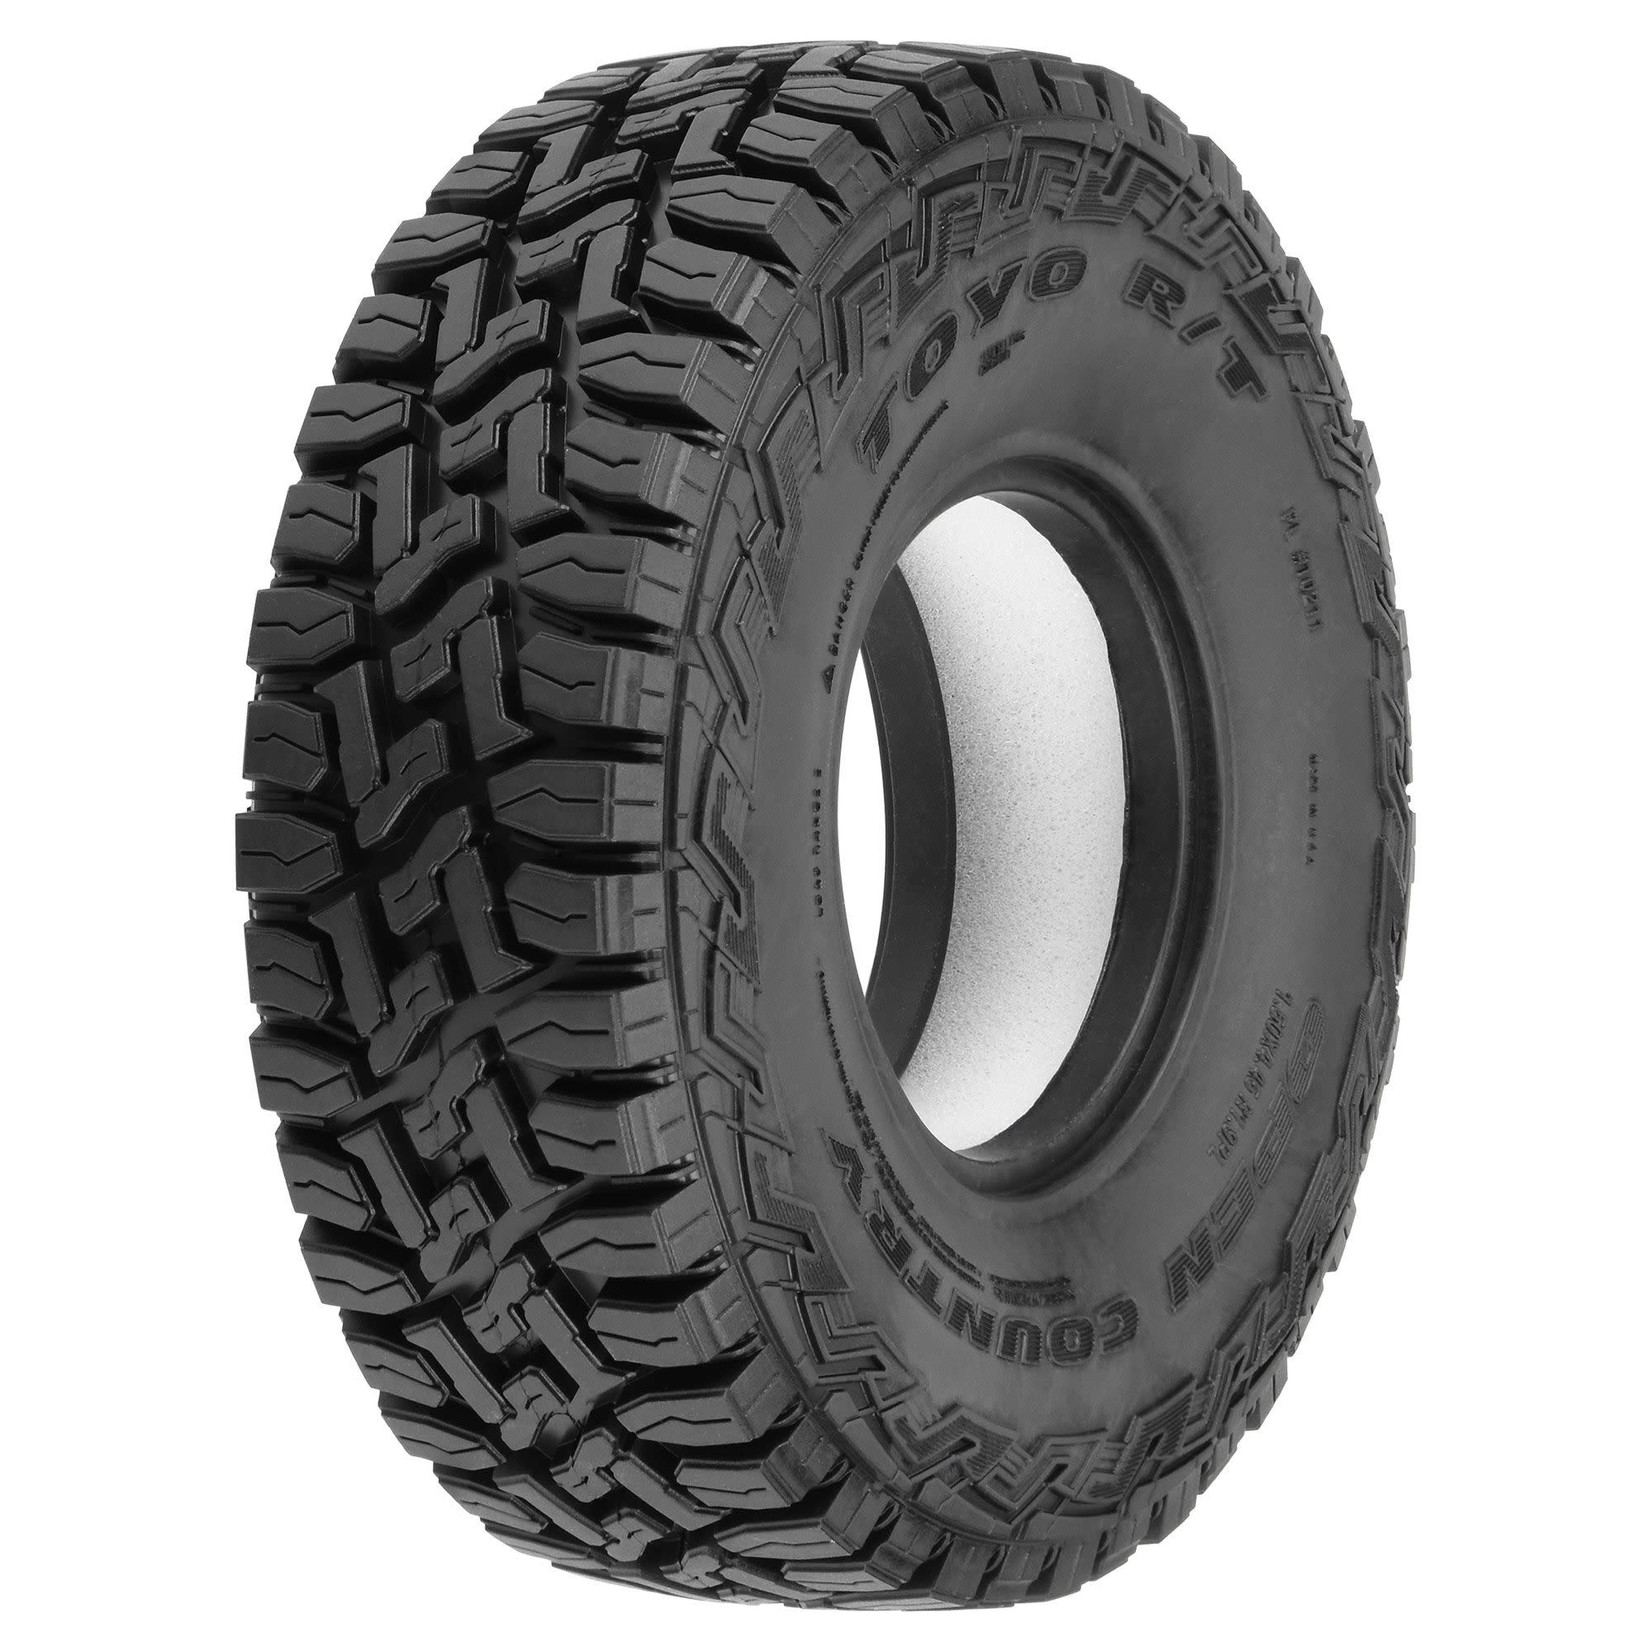 Pro-Line Pro-Line 1/10 Toyo Open Country R/T G8 F/R 1.9" Rock Crawling Tires (2) #10211-14